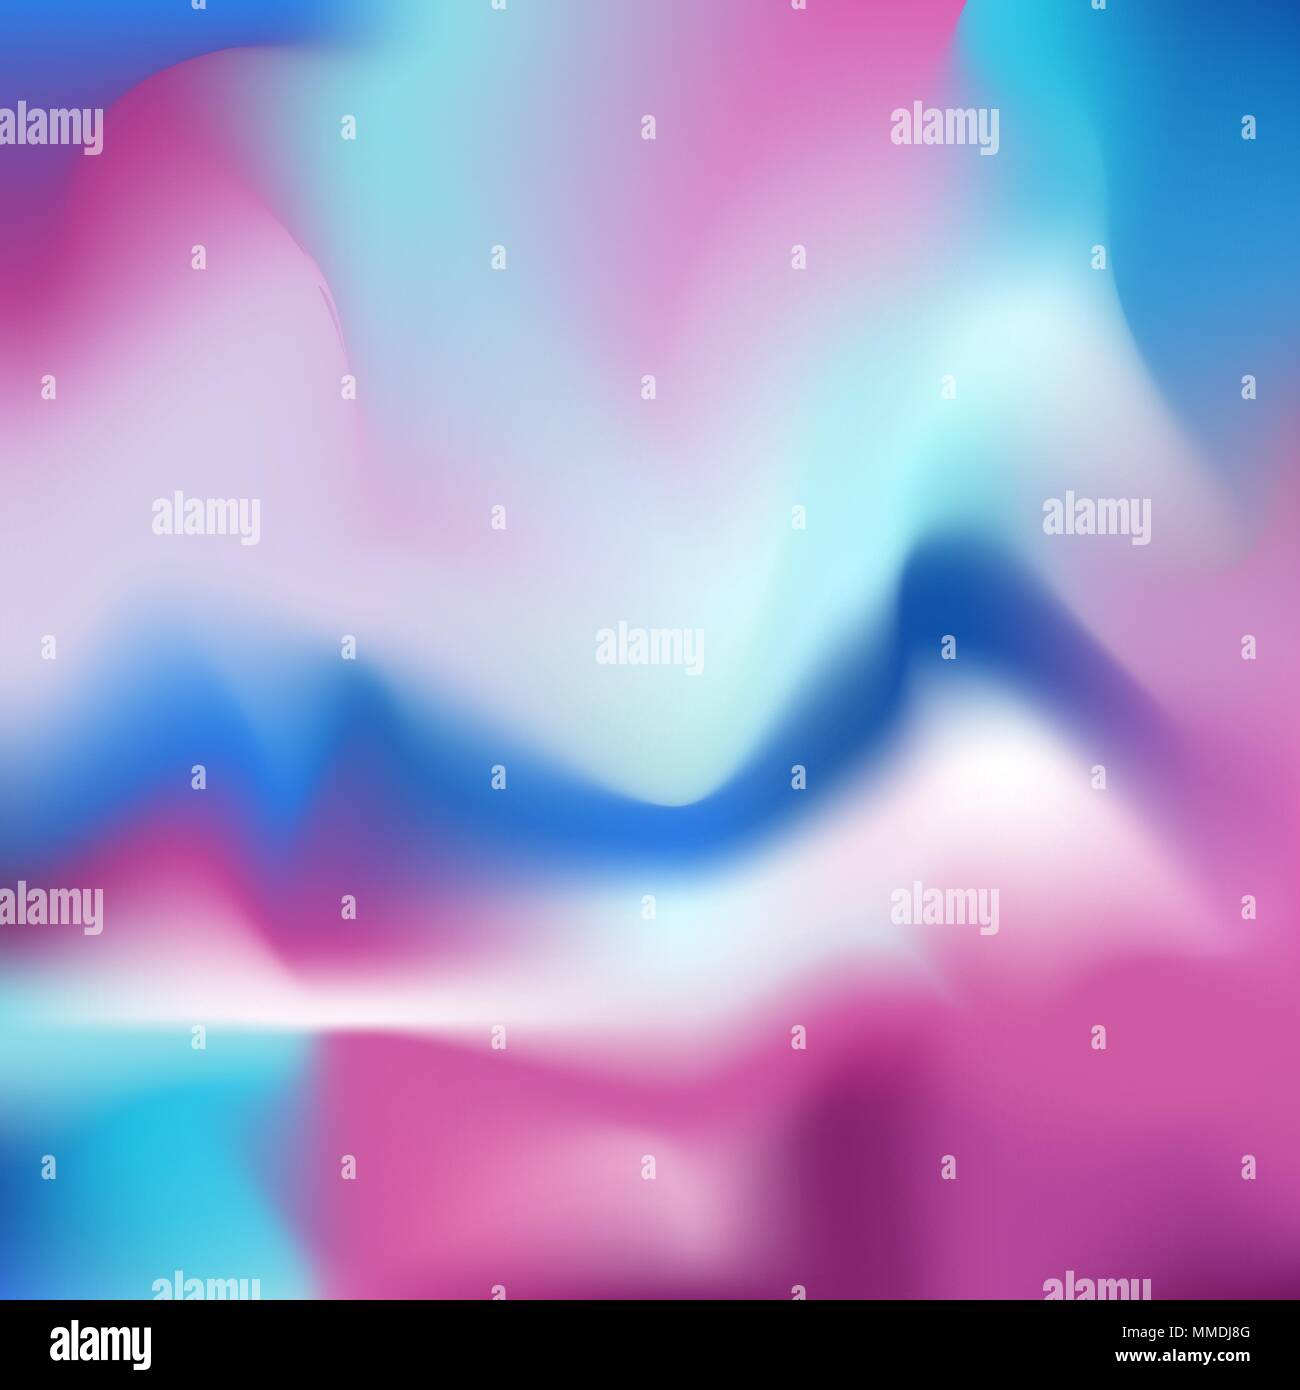 Abstract Ultra Violet Wavy Blurred Vector Background With For Music Cover Or Aroma Ayurveda Design Stock Vector Image Art Alamy